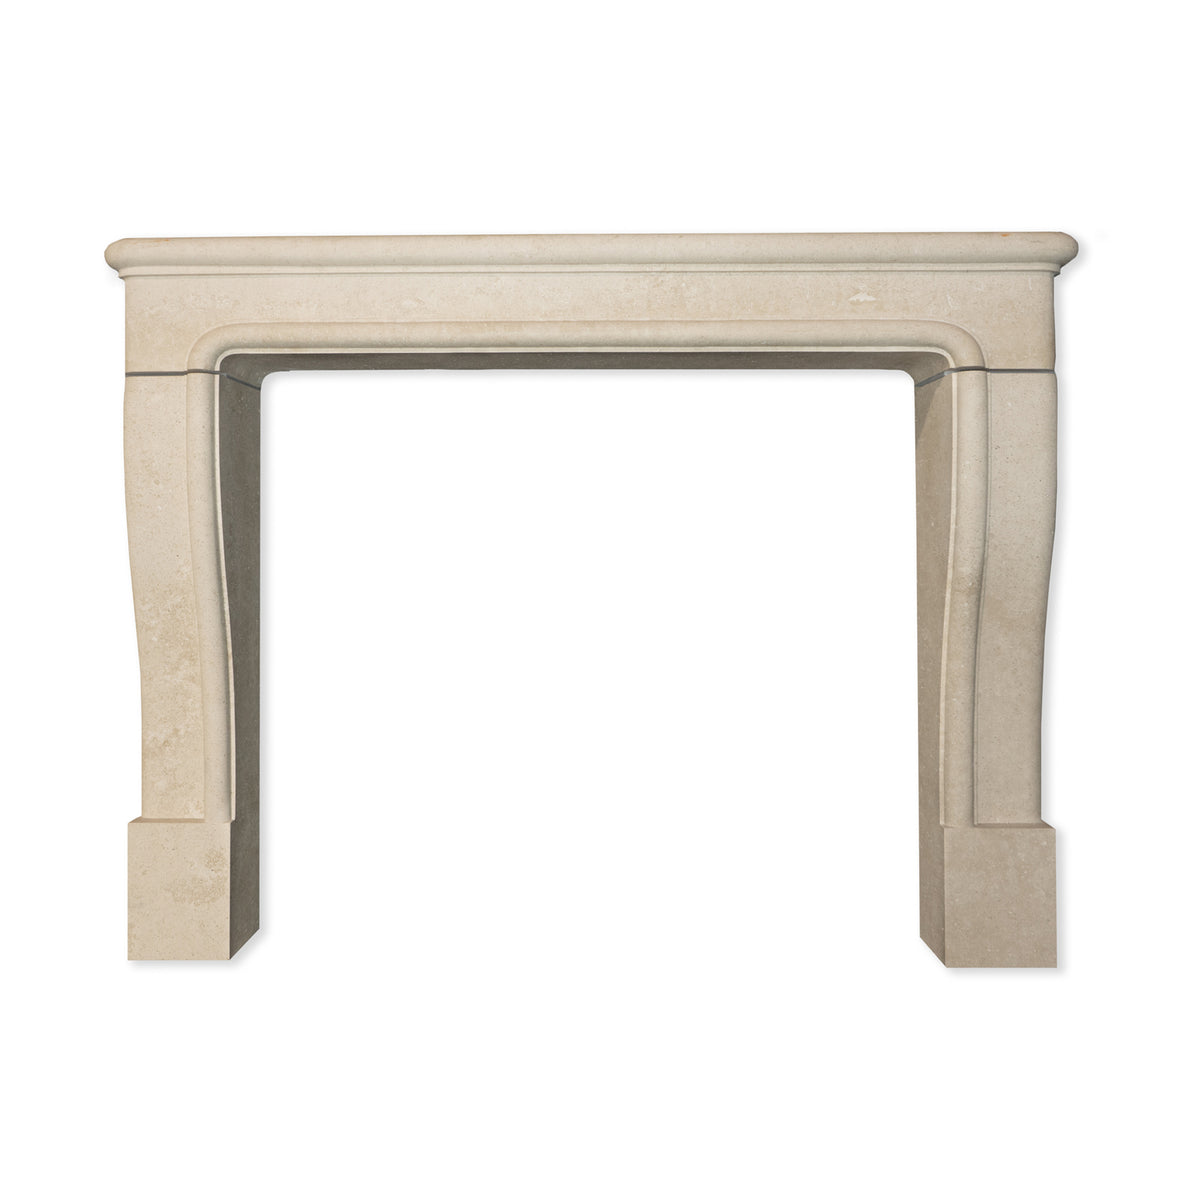 Hobson Fireplace in Seville Travertine with Honed Finish (Extended Range) Main Product Slider View